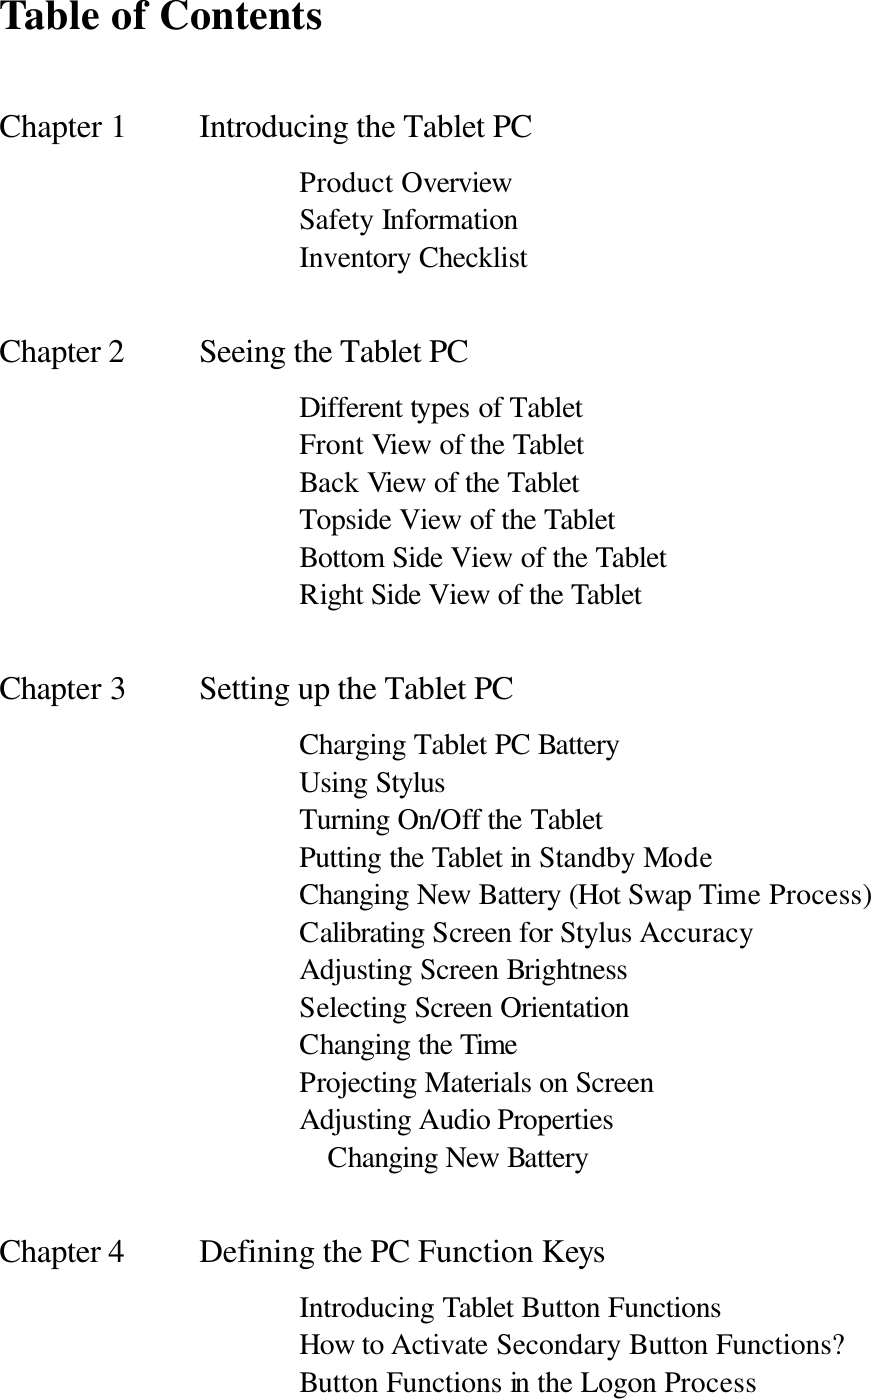  Table of Contents  Chapter 1     Introducing the Tablet PC       Product Overview       Safety Information       Inventory Checklist  Chapter 2    Seeing the Tablet PC             Different types of Tablet         Front View of the Tablet       Back View of the Tablet       Topside View of the Tablet       Bottom Side View of the Tablet       Right Side View of the Tablet  Chapter 3     Setting up the Tablet PC       Charging Tablet PC Battery       Using Stylus       Turning On/Off the Tablet       Putting the Tablet in Standby Mode       Changing New Battery (Hot Swap Time Process)       Calibrating Screen for Stylus Accuracy       Adjusting Screen Brightness       Selecting Screen Orientation       Changing the Time       Projecting Materials on Screen       Adjusting Audio Properties                      Changing New Battery  Chapter 4    Defining the PC Function Keys       Introducing Tablet Button Functions       How to Activate Secondary Button Functions?       Button Functions in the Logon Process 